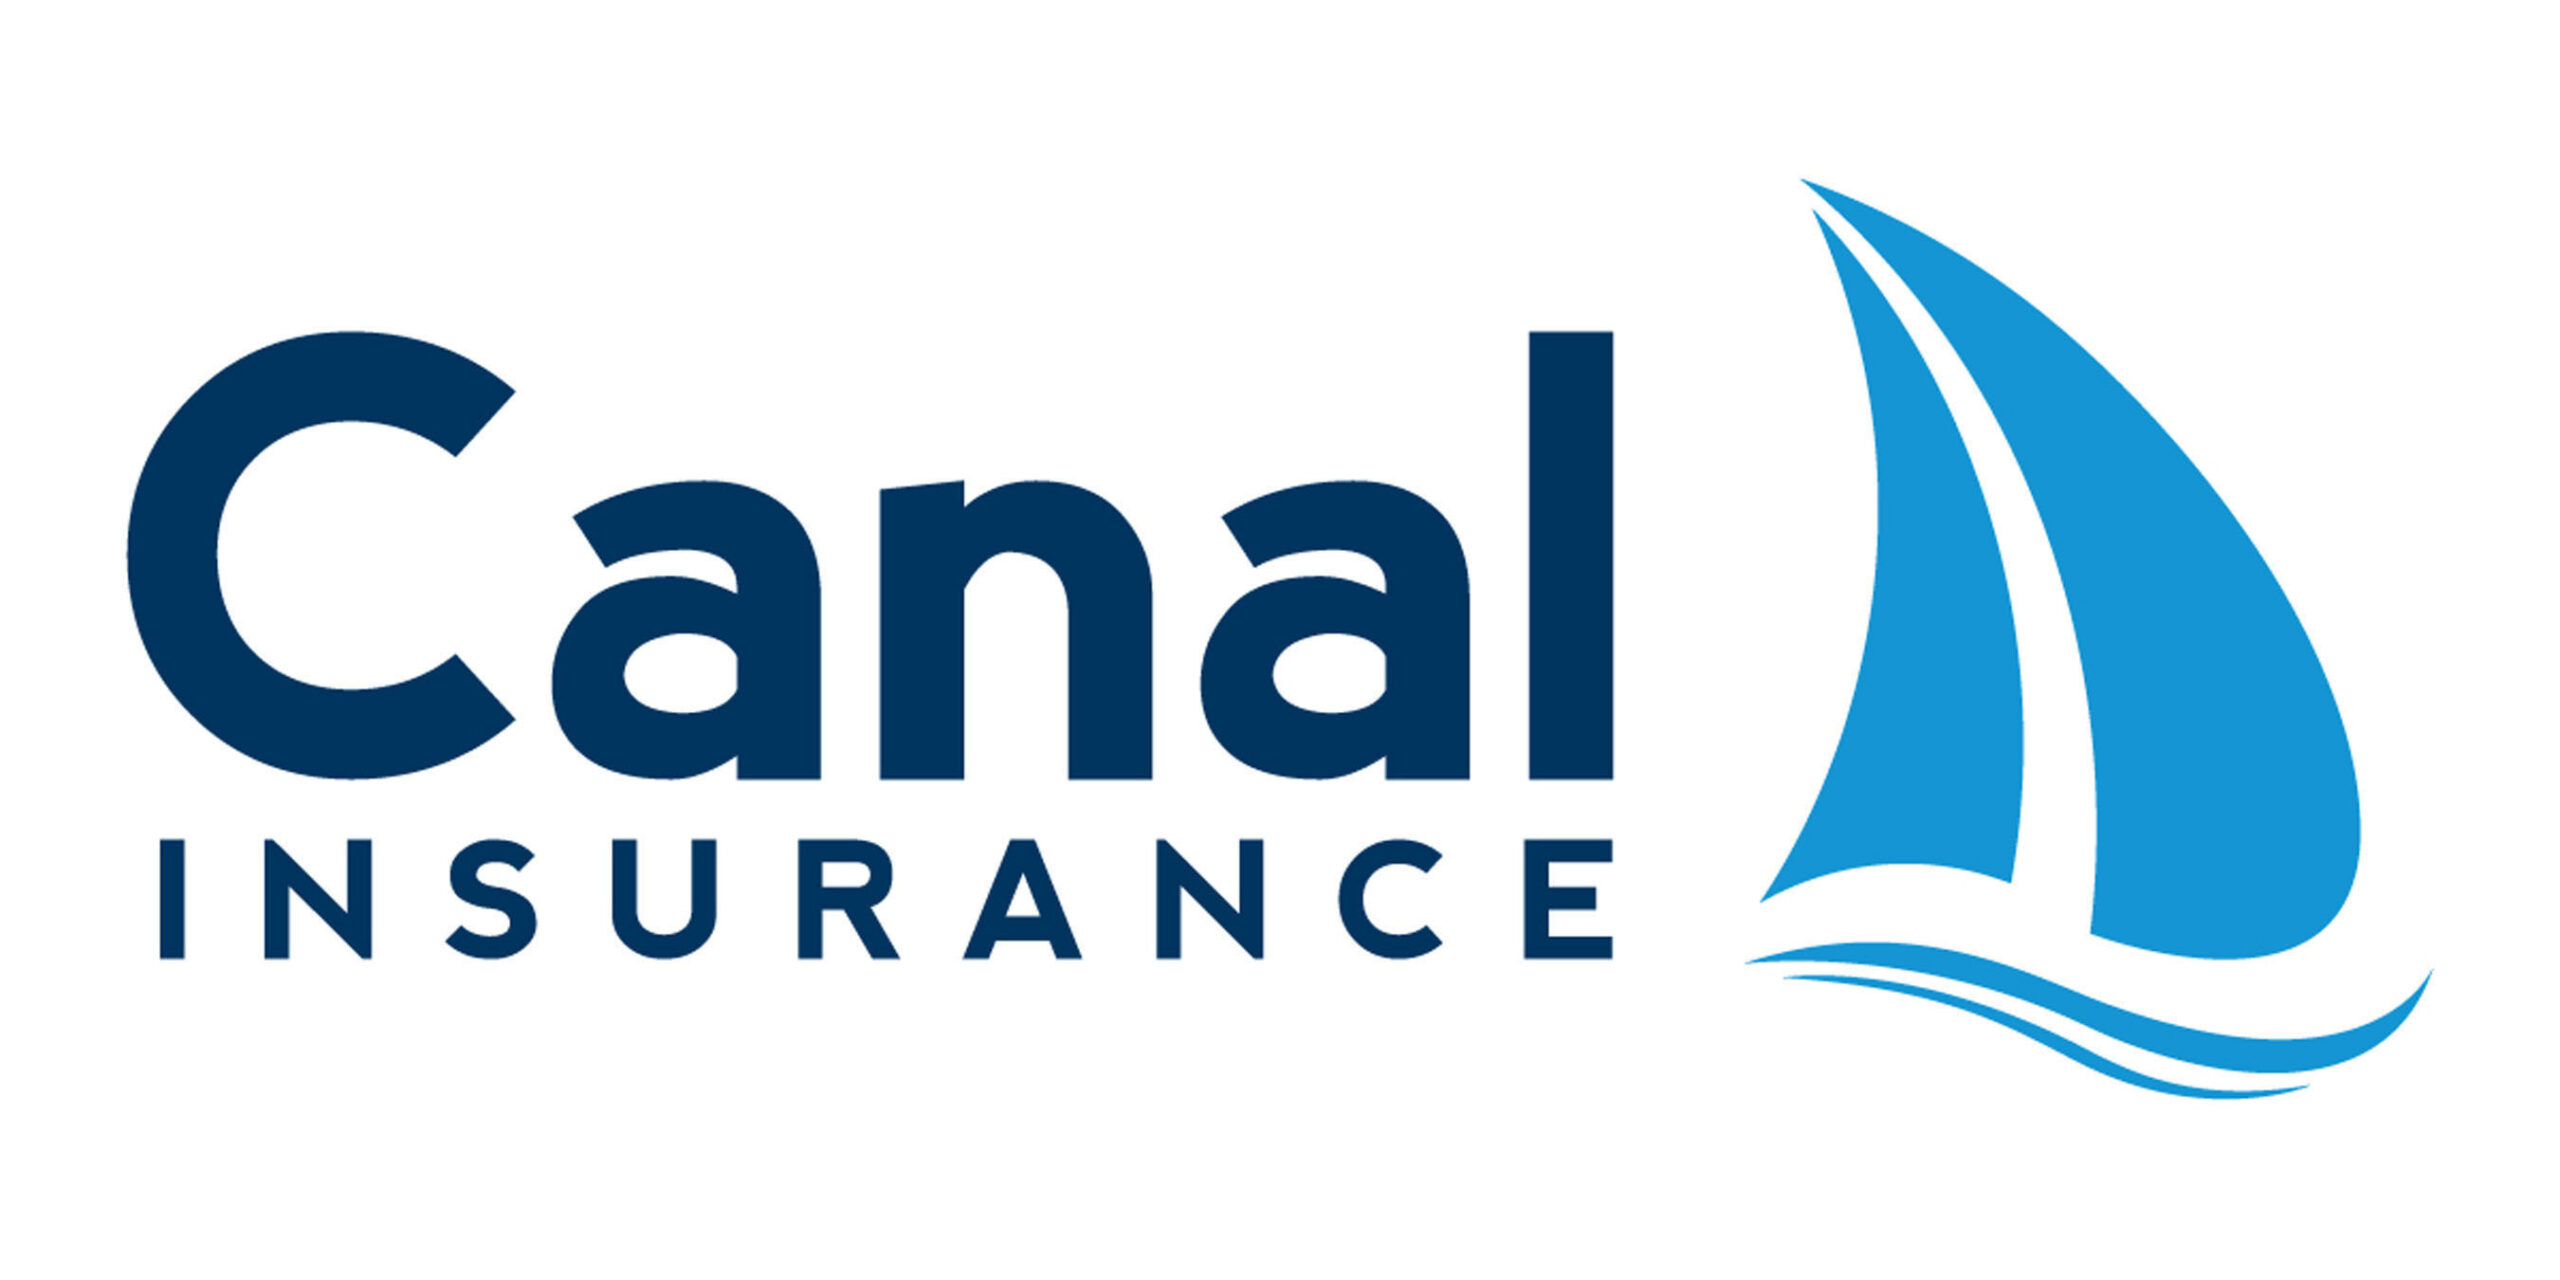 Established in 1939 and headquartered in Greenville, South Carolina, Canal Insurance Company is recognized in the industry as a stable, responsive and financially strong insurer of commercial trucking operations. For more information, please visit www.canalinsurance.com . (PRNewsFoto/Canal Insurance Company) (PRNewsFoto/)